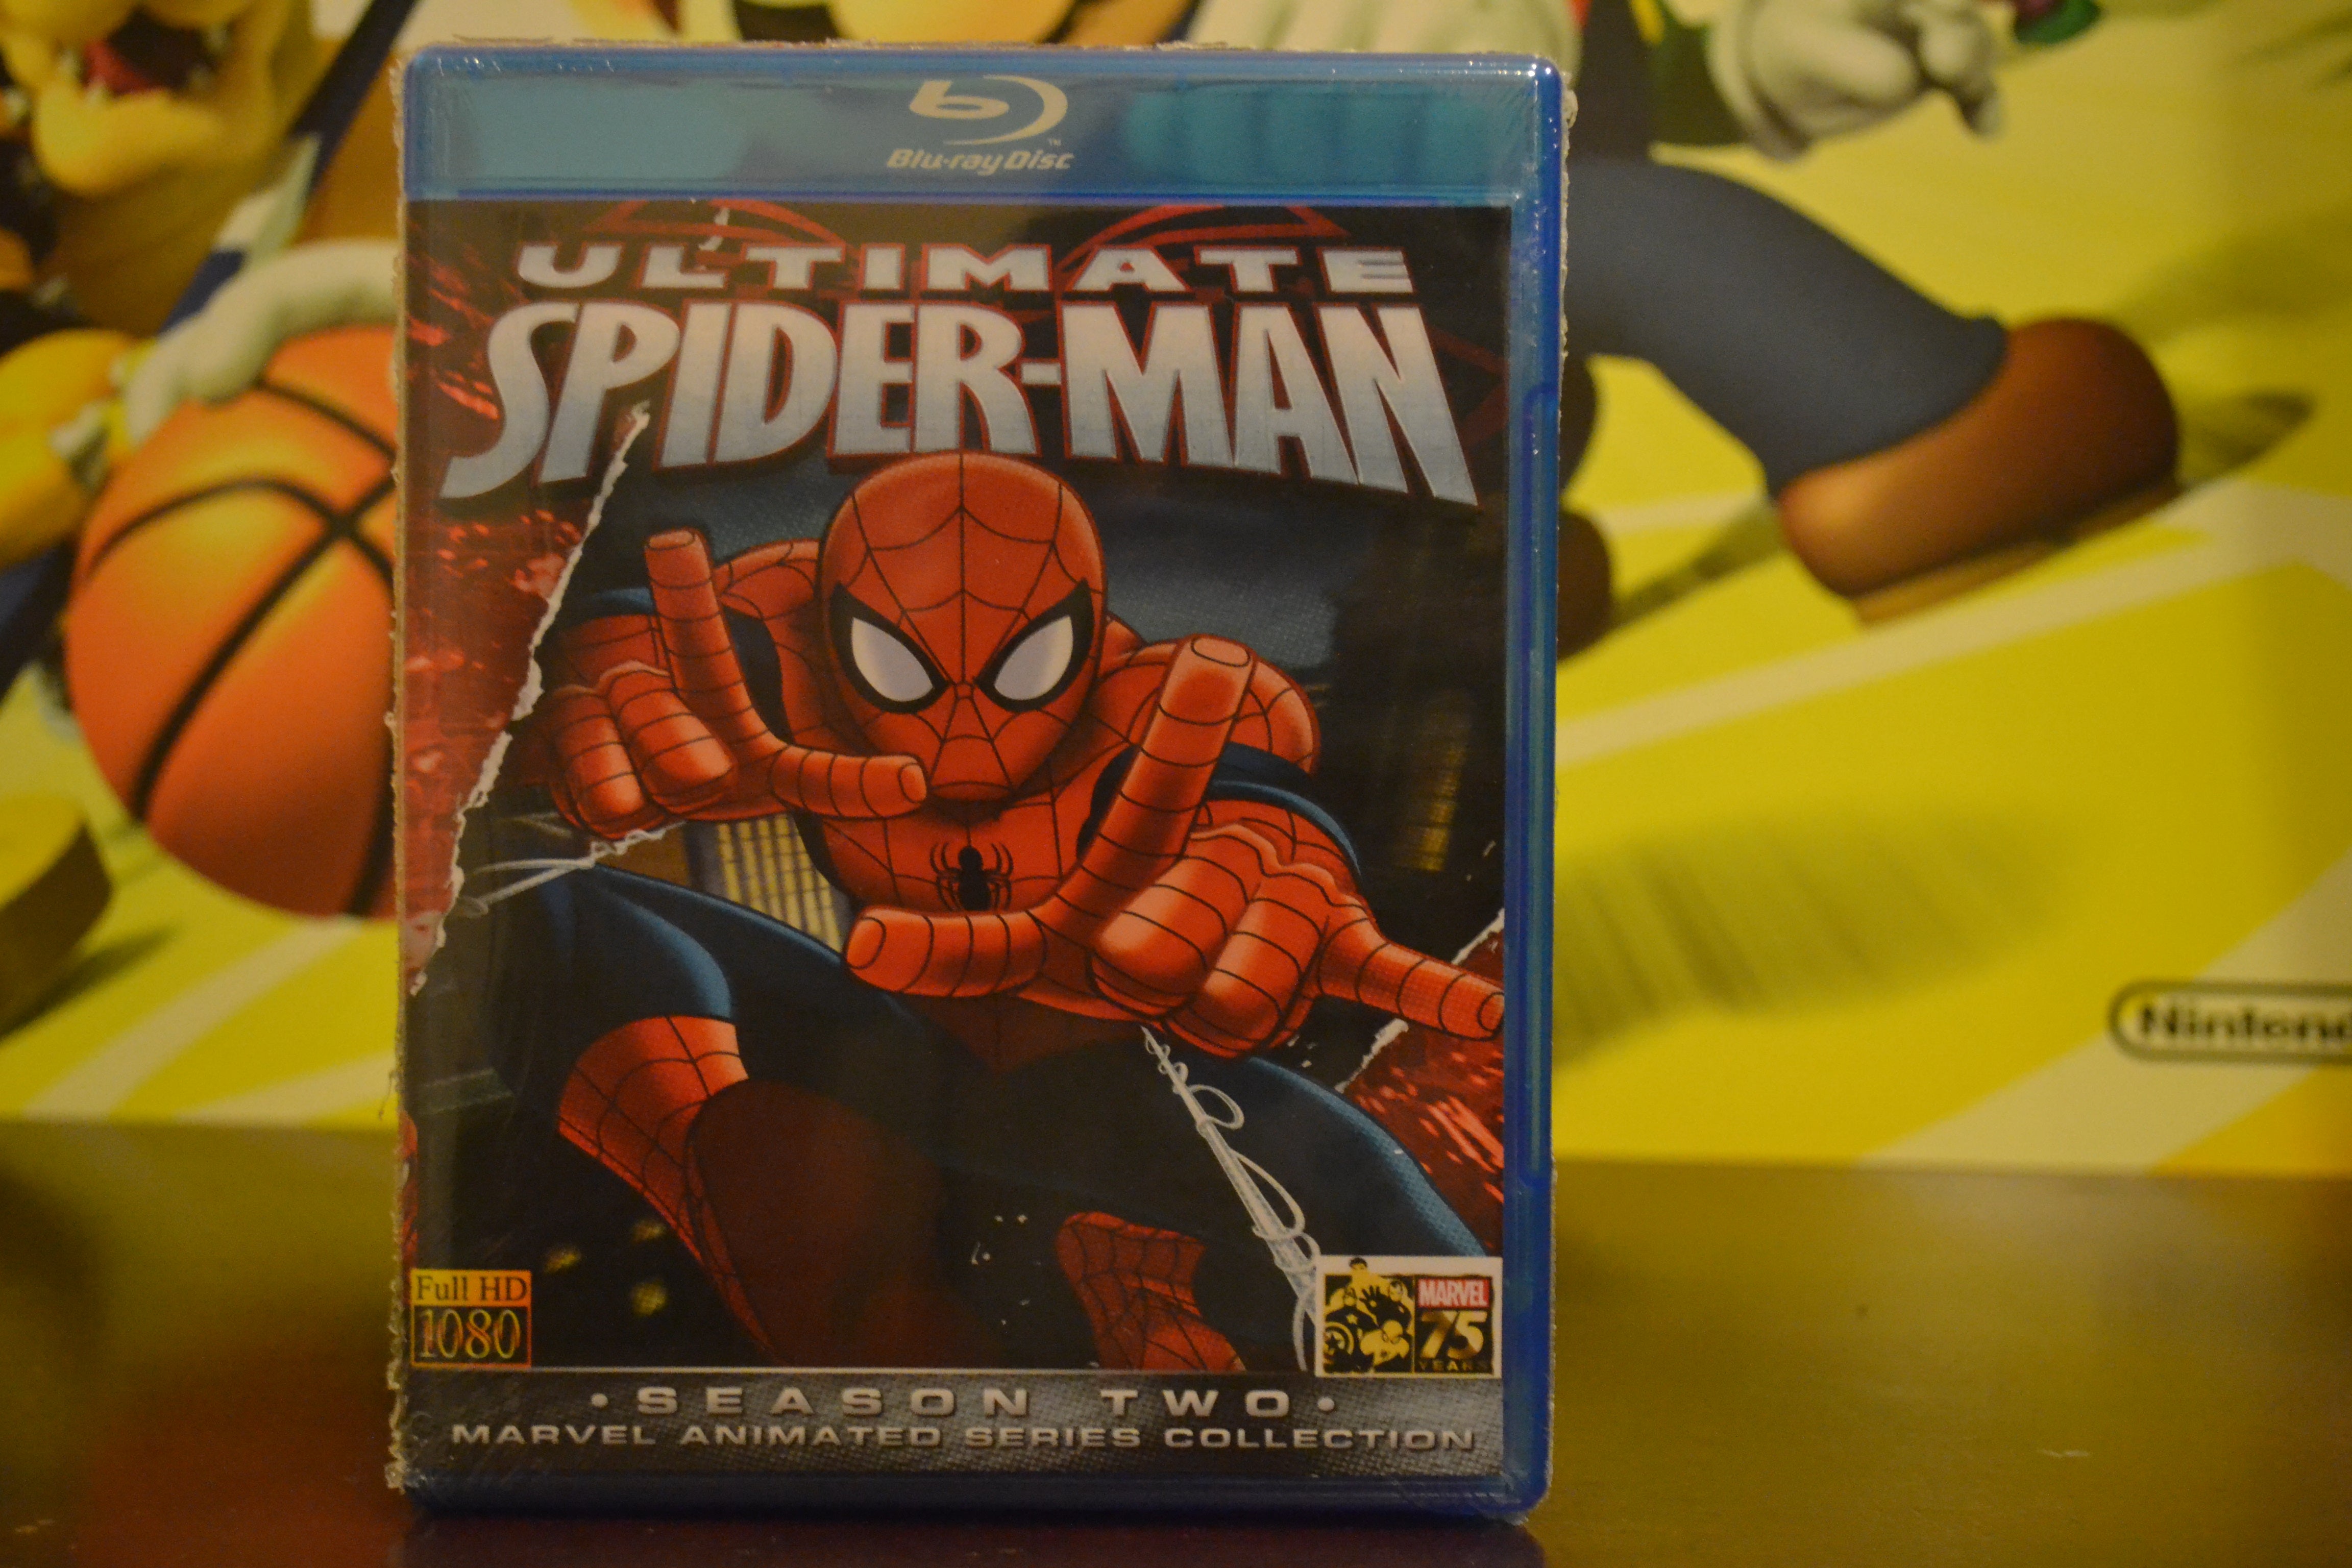 Ultimate Spider-Man The Complete Season 2 Blu-Ray Set